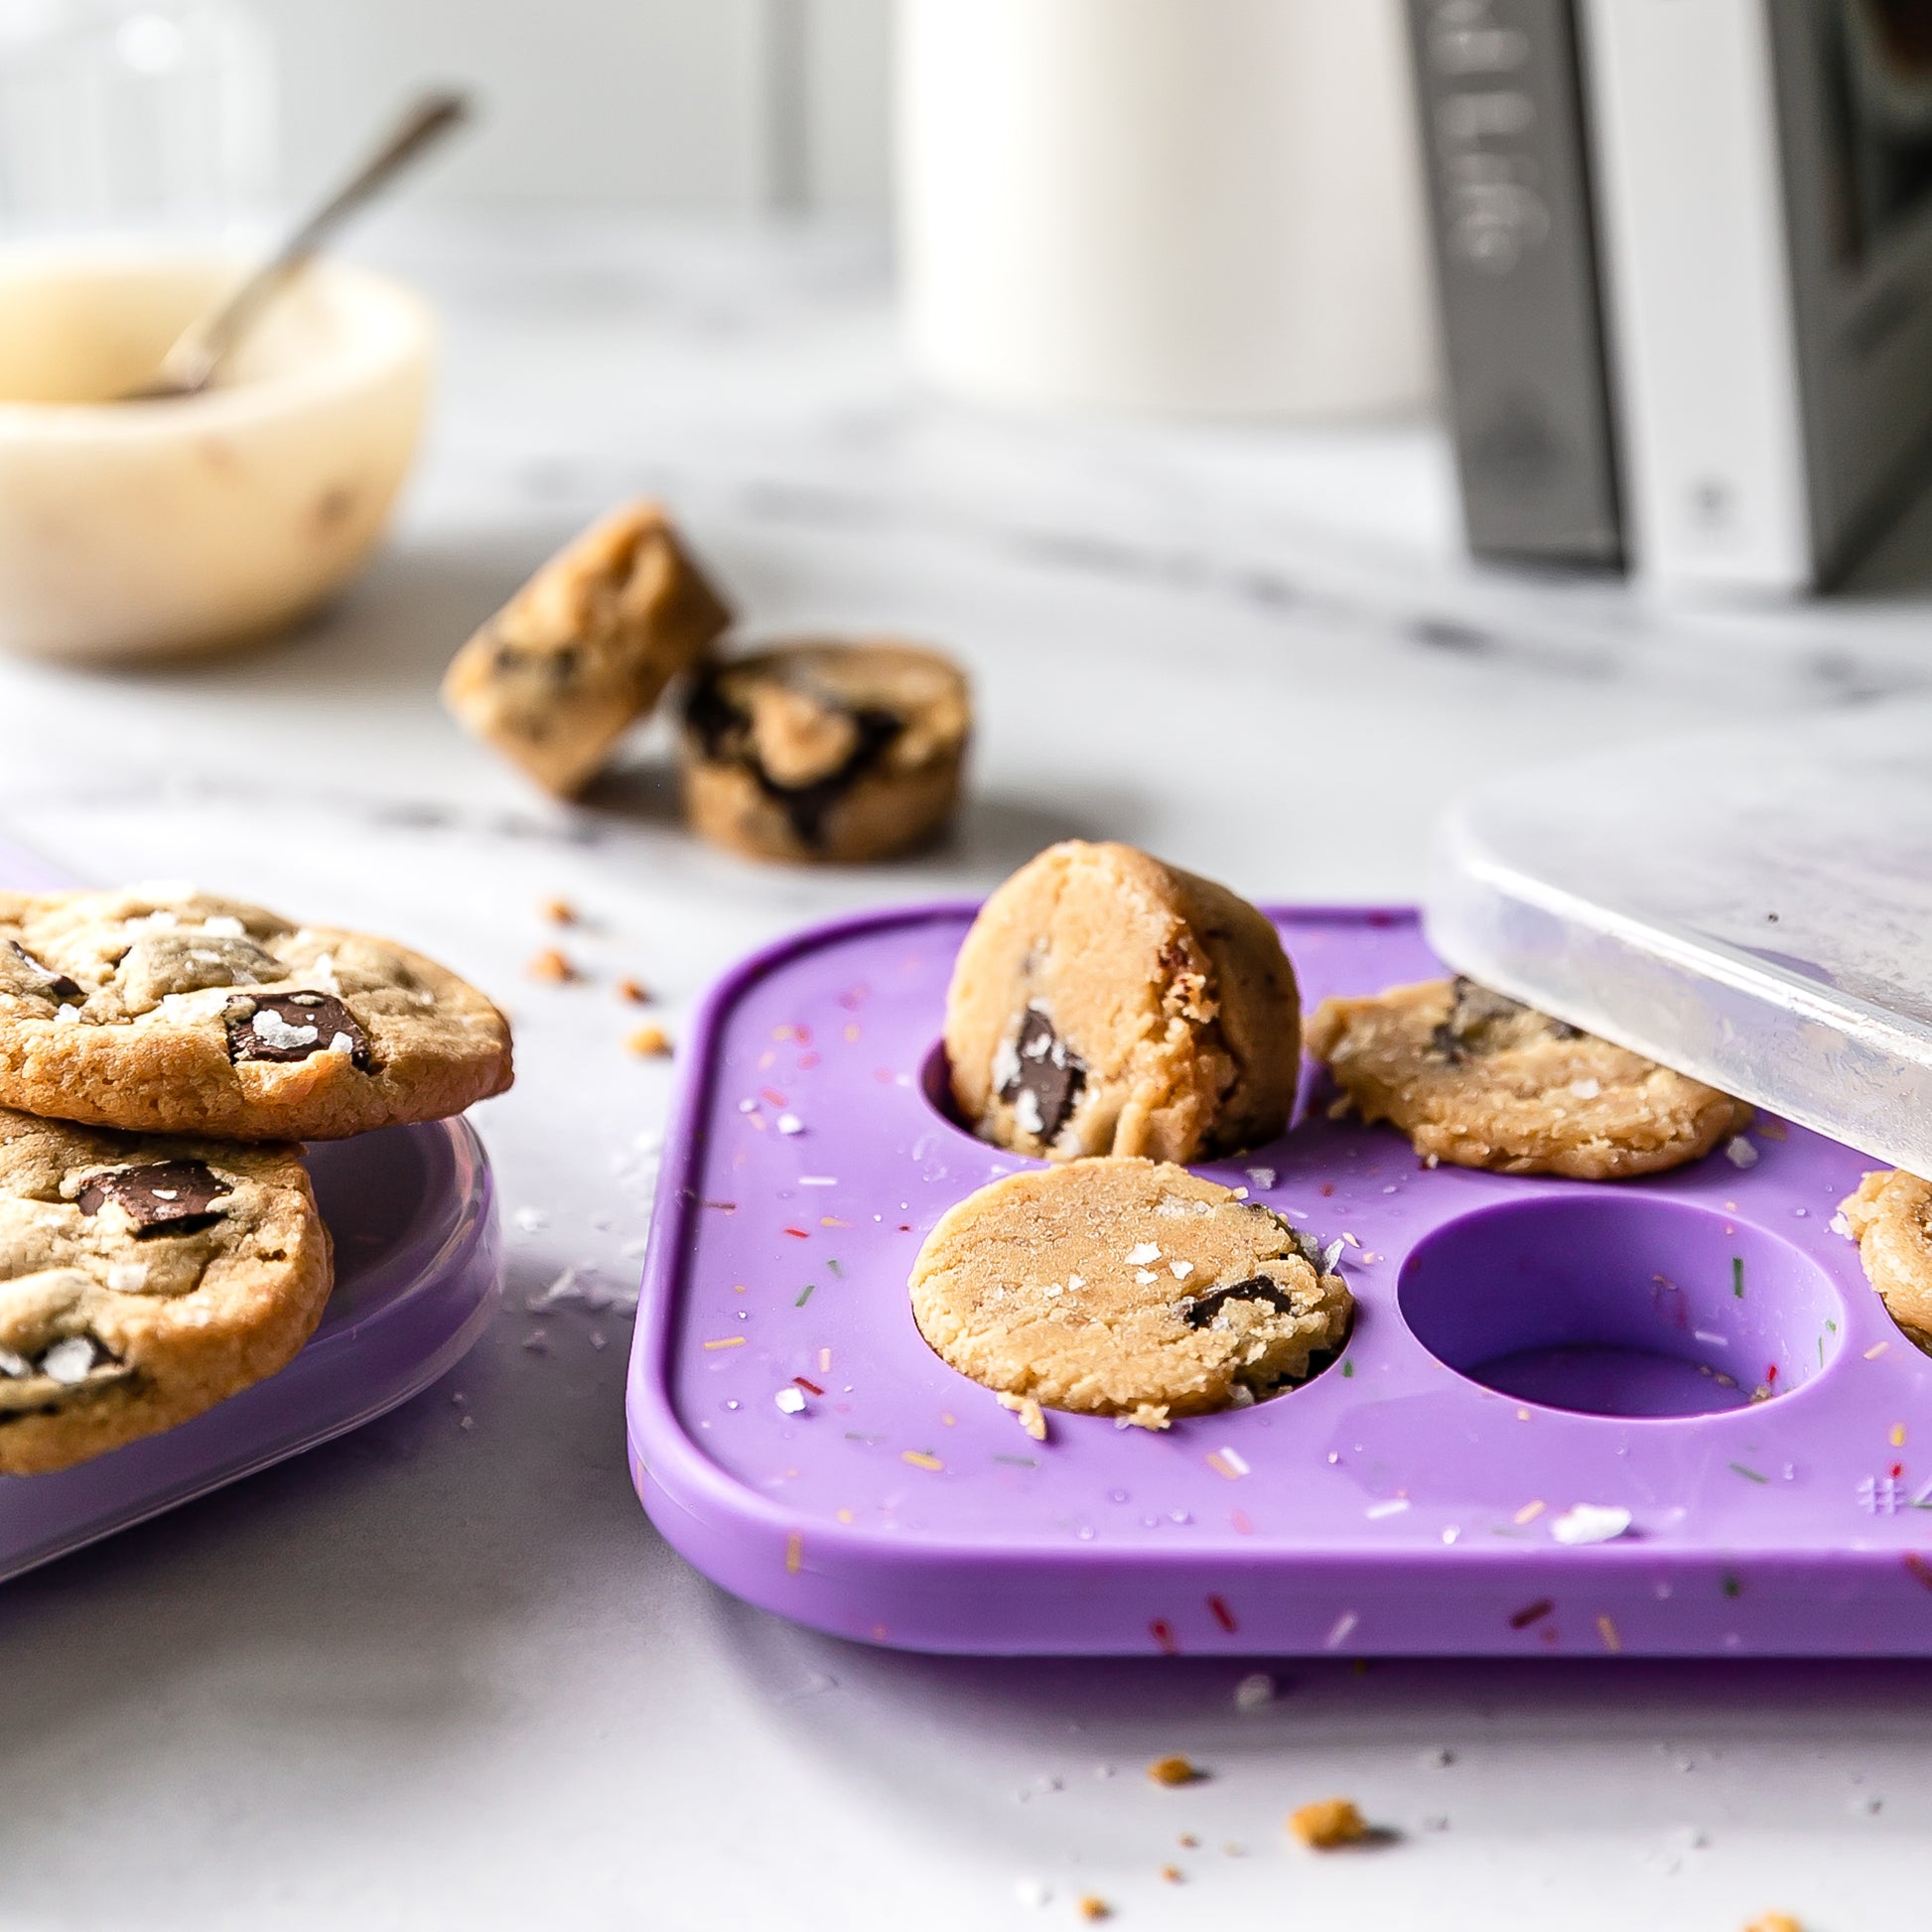 Small Cookie Scoop Set - 2 PCS Include 1 tsp / 2 tsp Cookie Dough